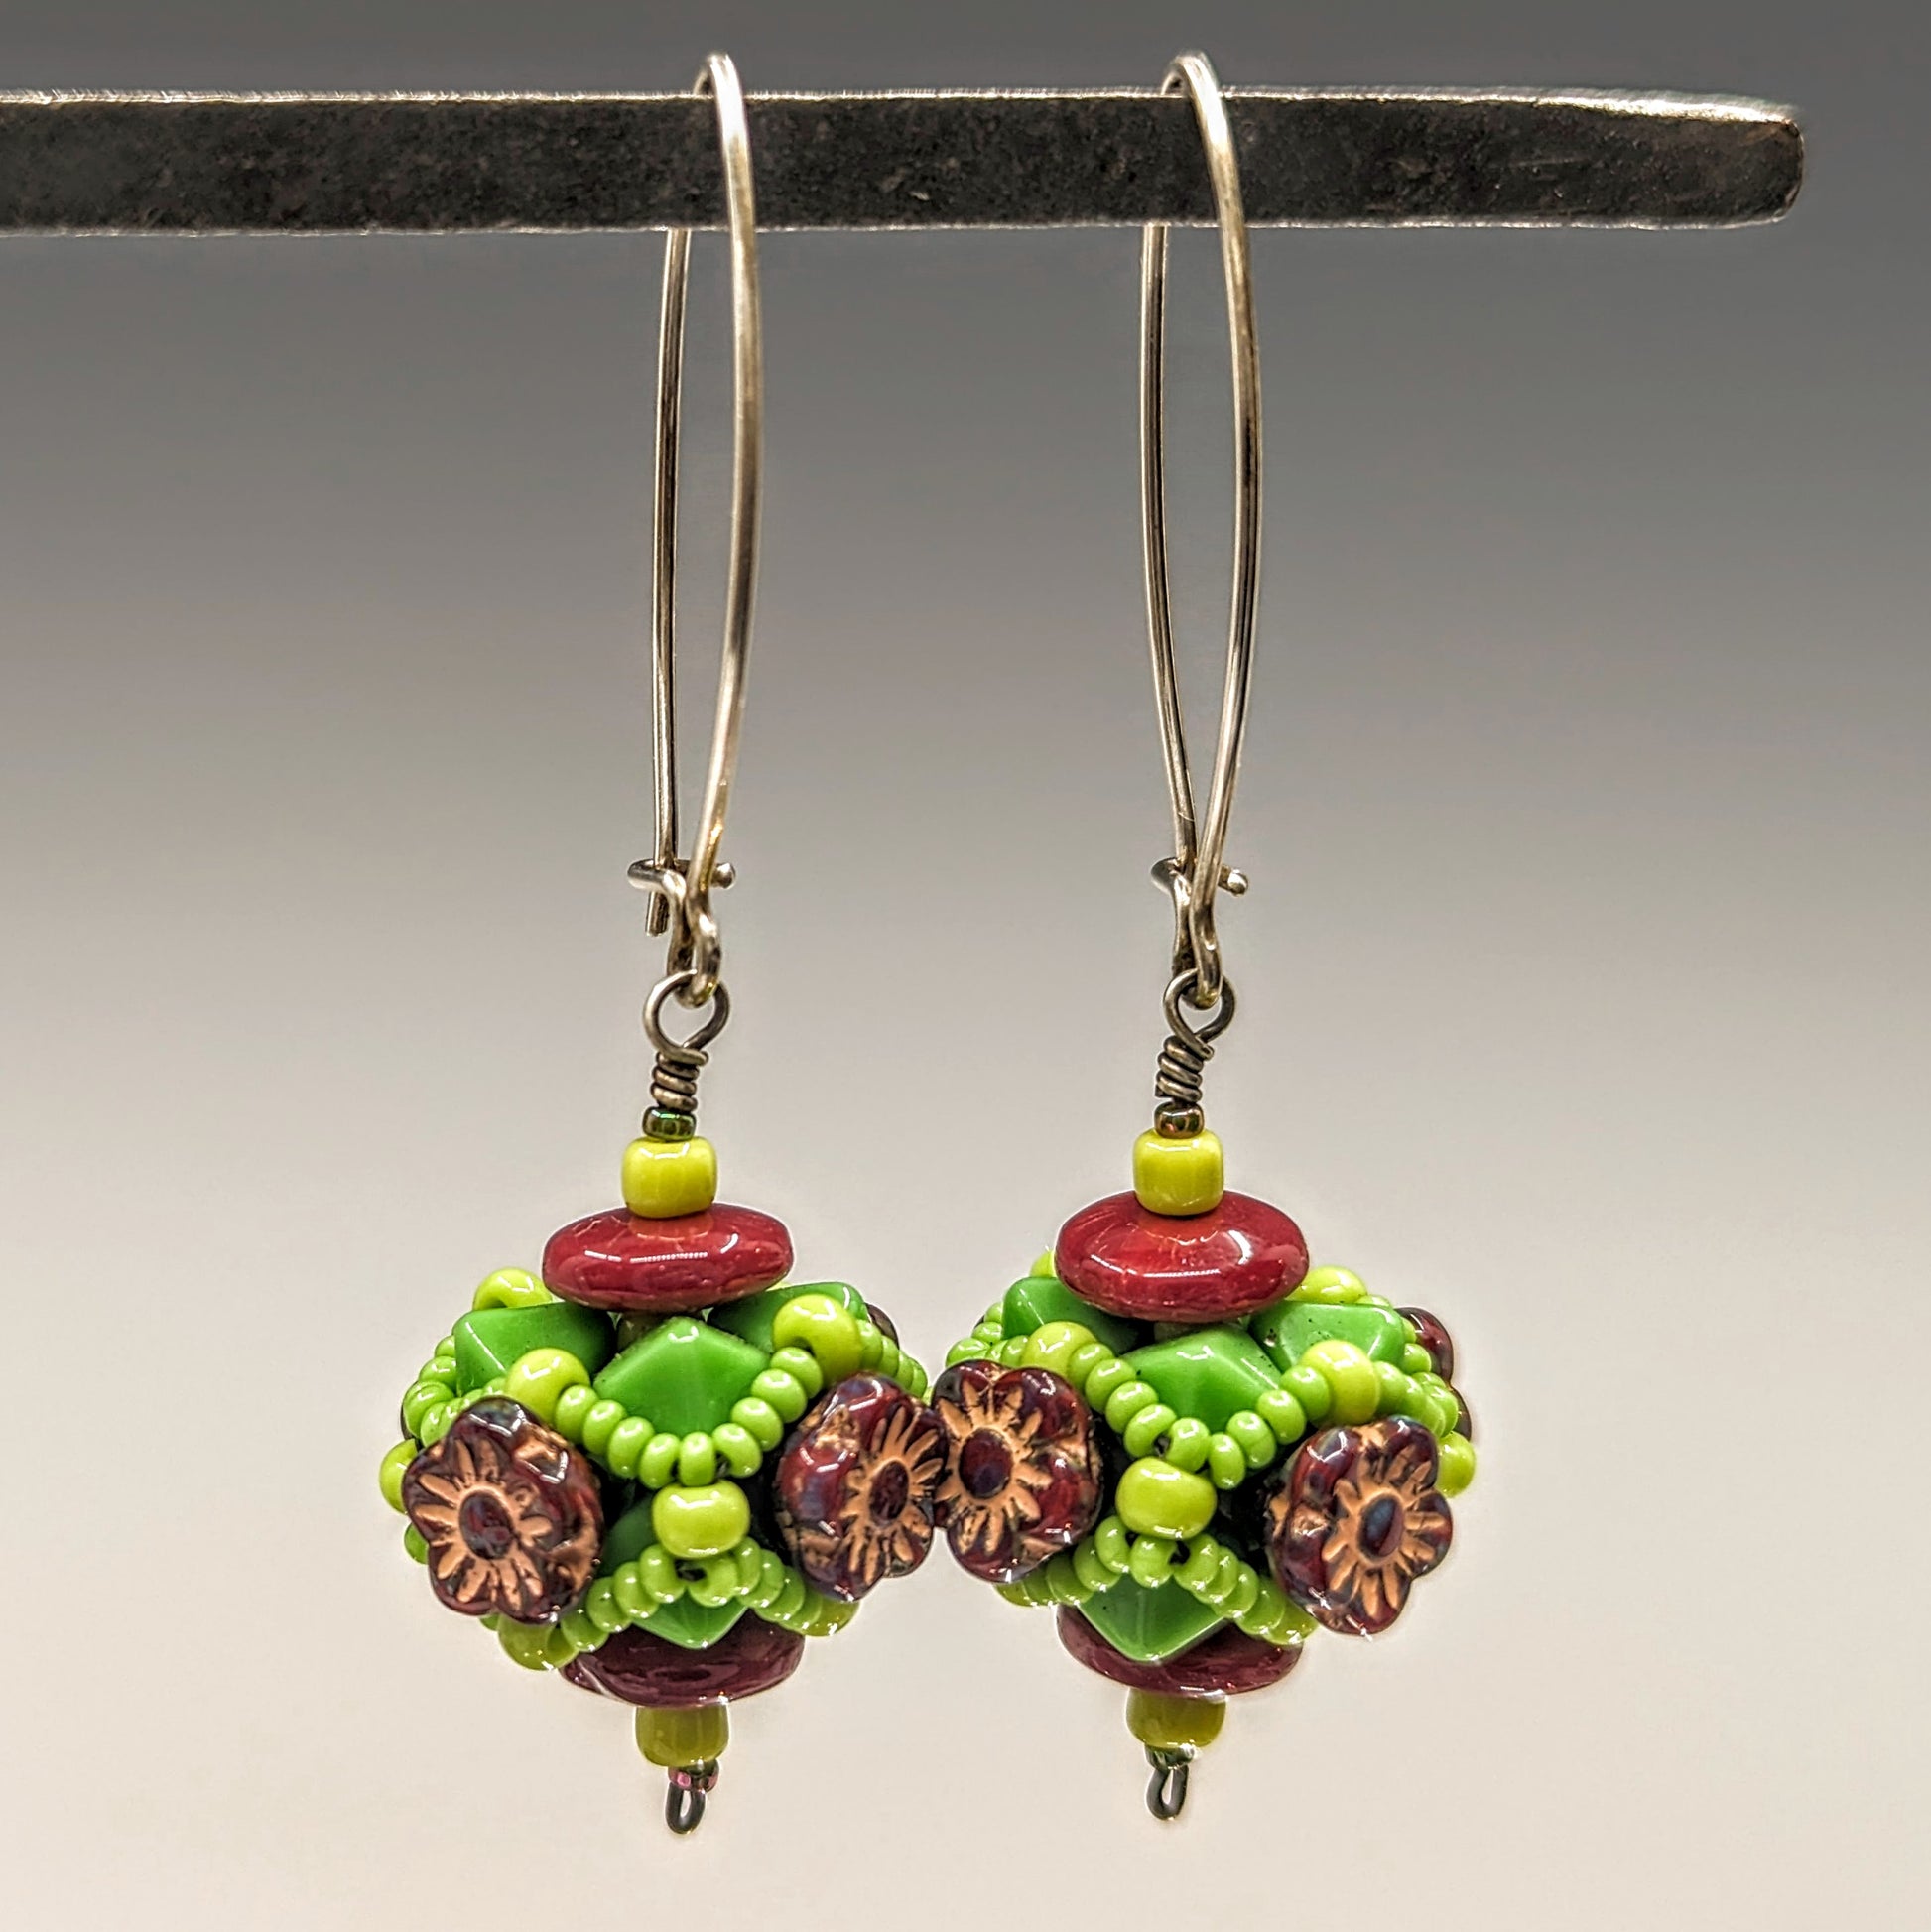 A pair of earrings hang from a black bar, against a gray background. The earrings have long silver oval wires that latch and there is a beaded ball dangling from the bottom that has burgundy flowers surrounded by a web of spring green seed beads.